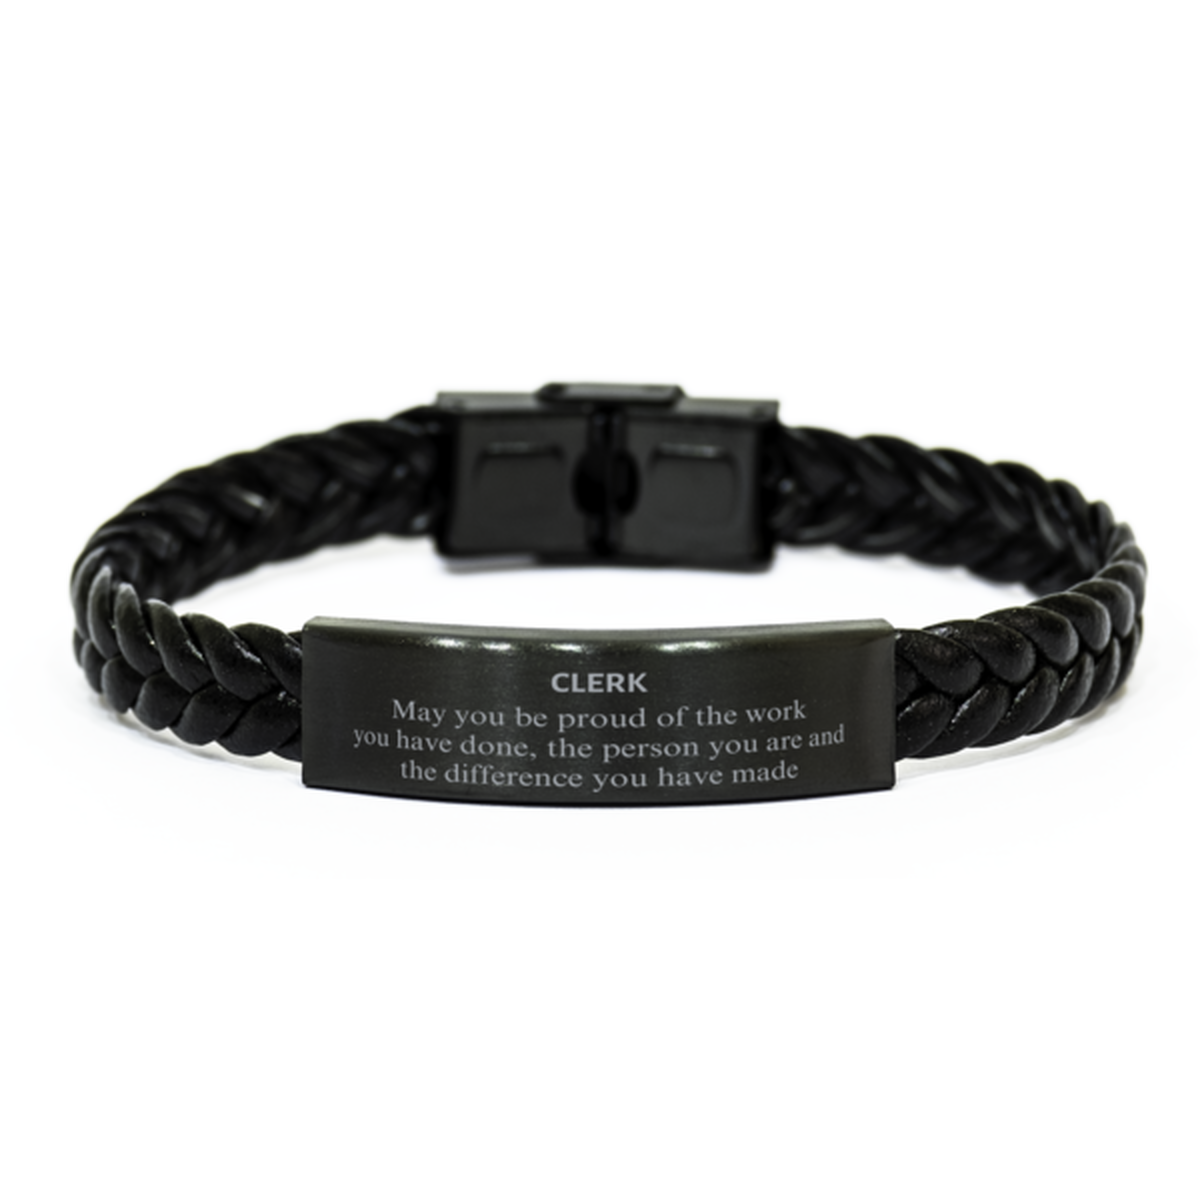 Clerk May you be proud of the work you have done, Retirement Clerk Braided Leather Bracelet for Colleague Appreciation Gifts Amazing for Clerk